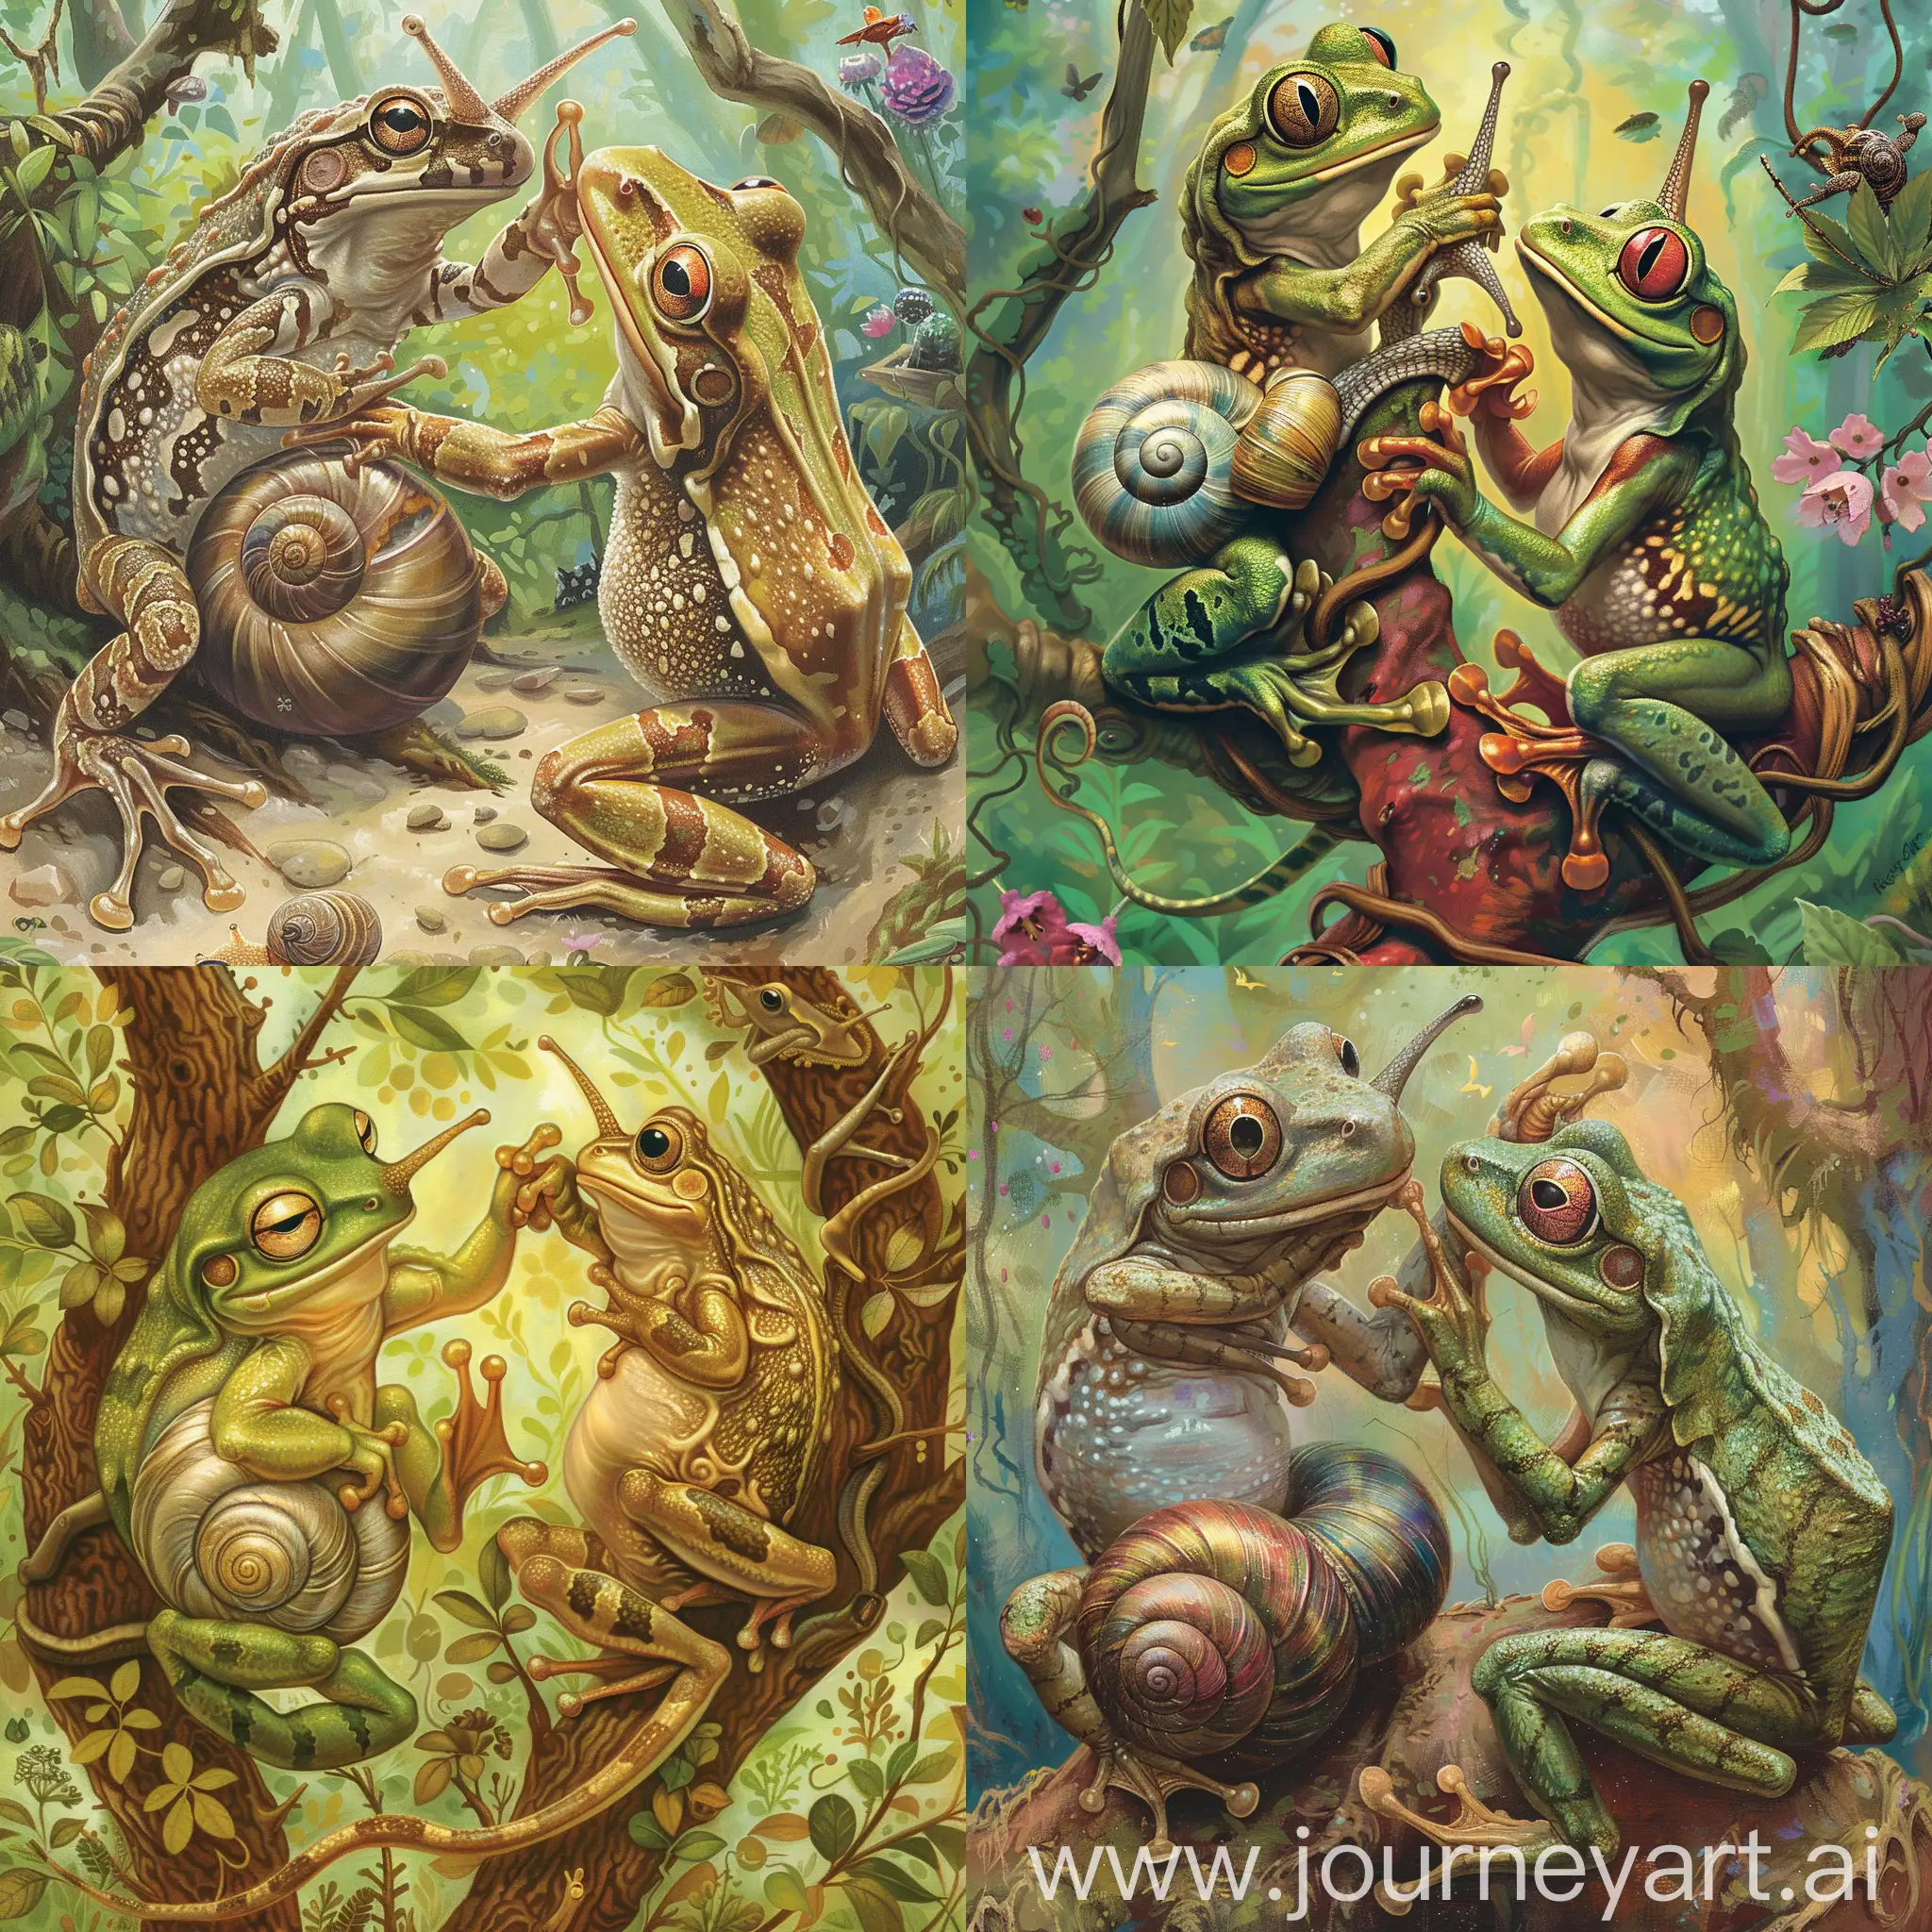 "Forest animal fairy tale style ((snail and tree frog wrestling)))(focus) design, featuring enchanting and friendly lizards, snails, mythical creatures, and whimsical characters on colorful backgrounds to capture the attention and spark the imagination of young readers.